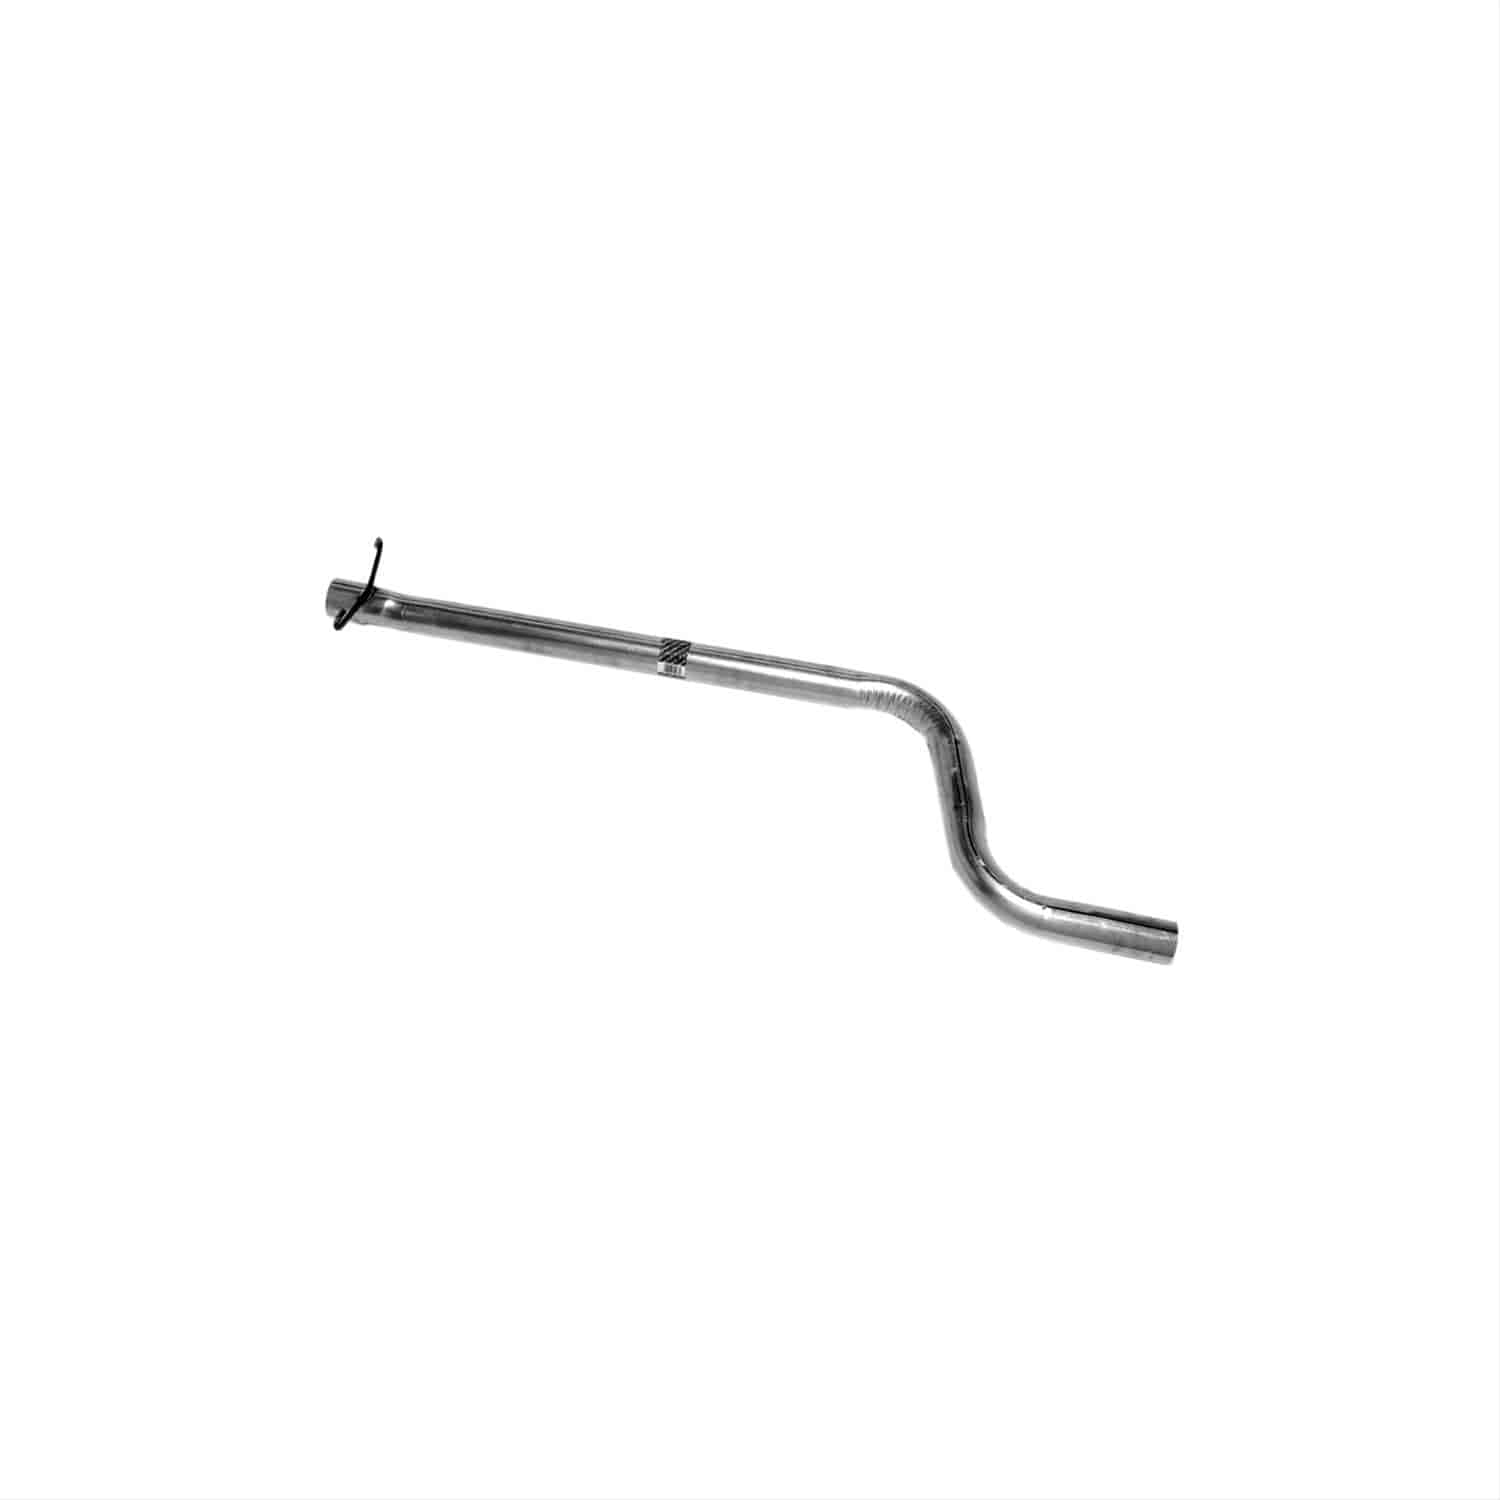 Exhaust FRONT EXYENSION PIPE